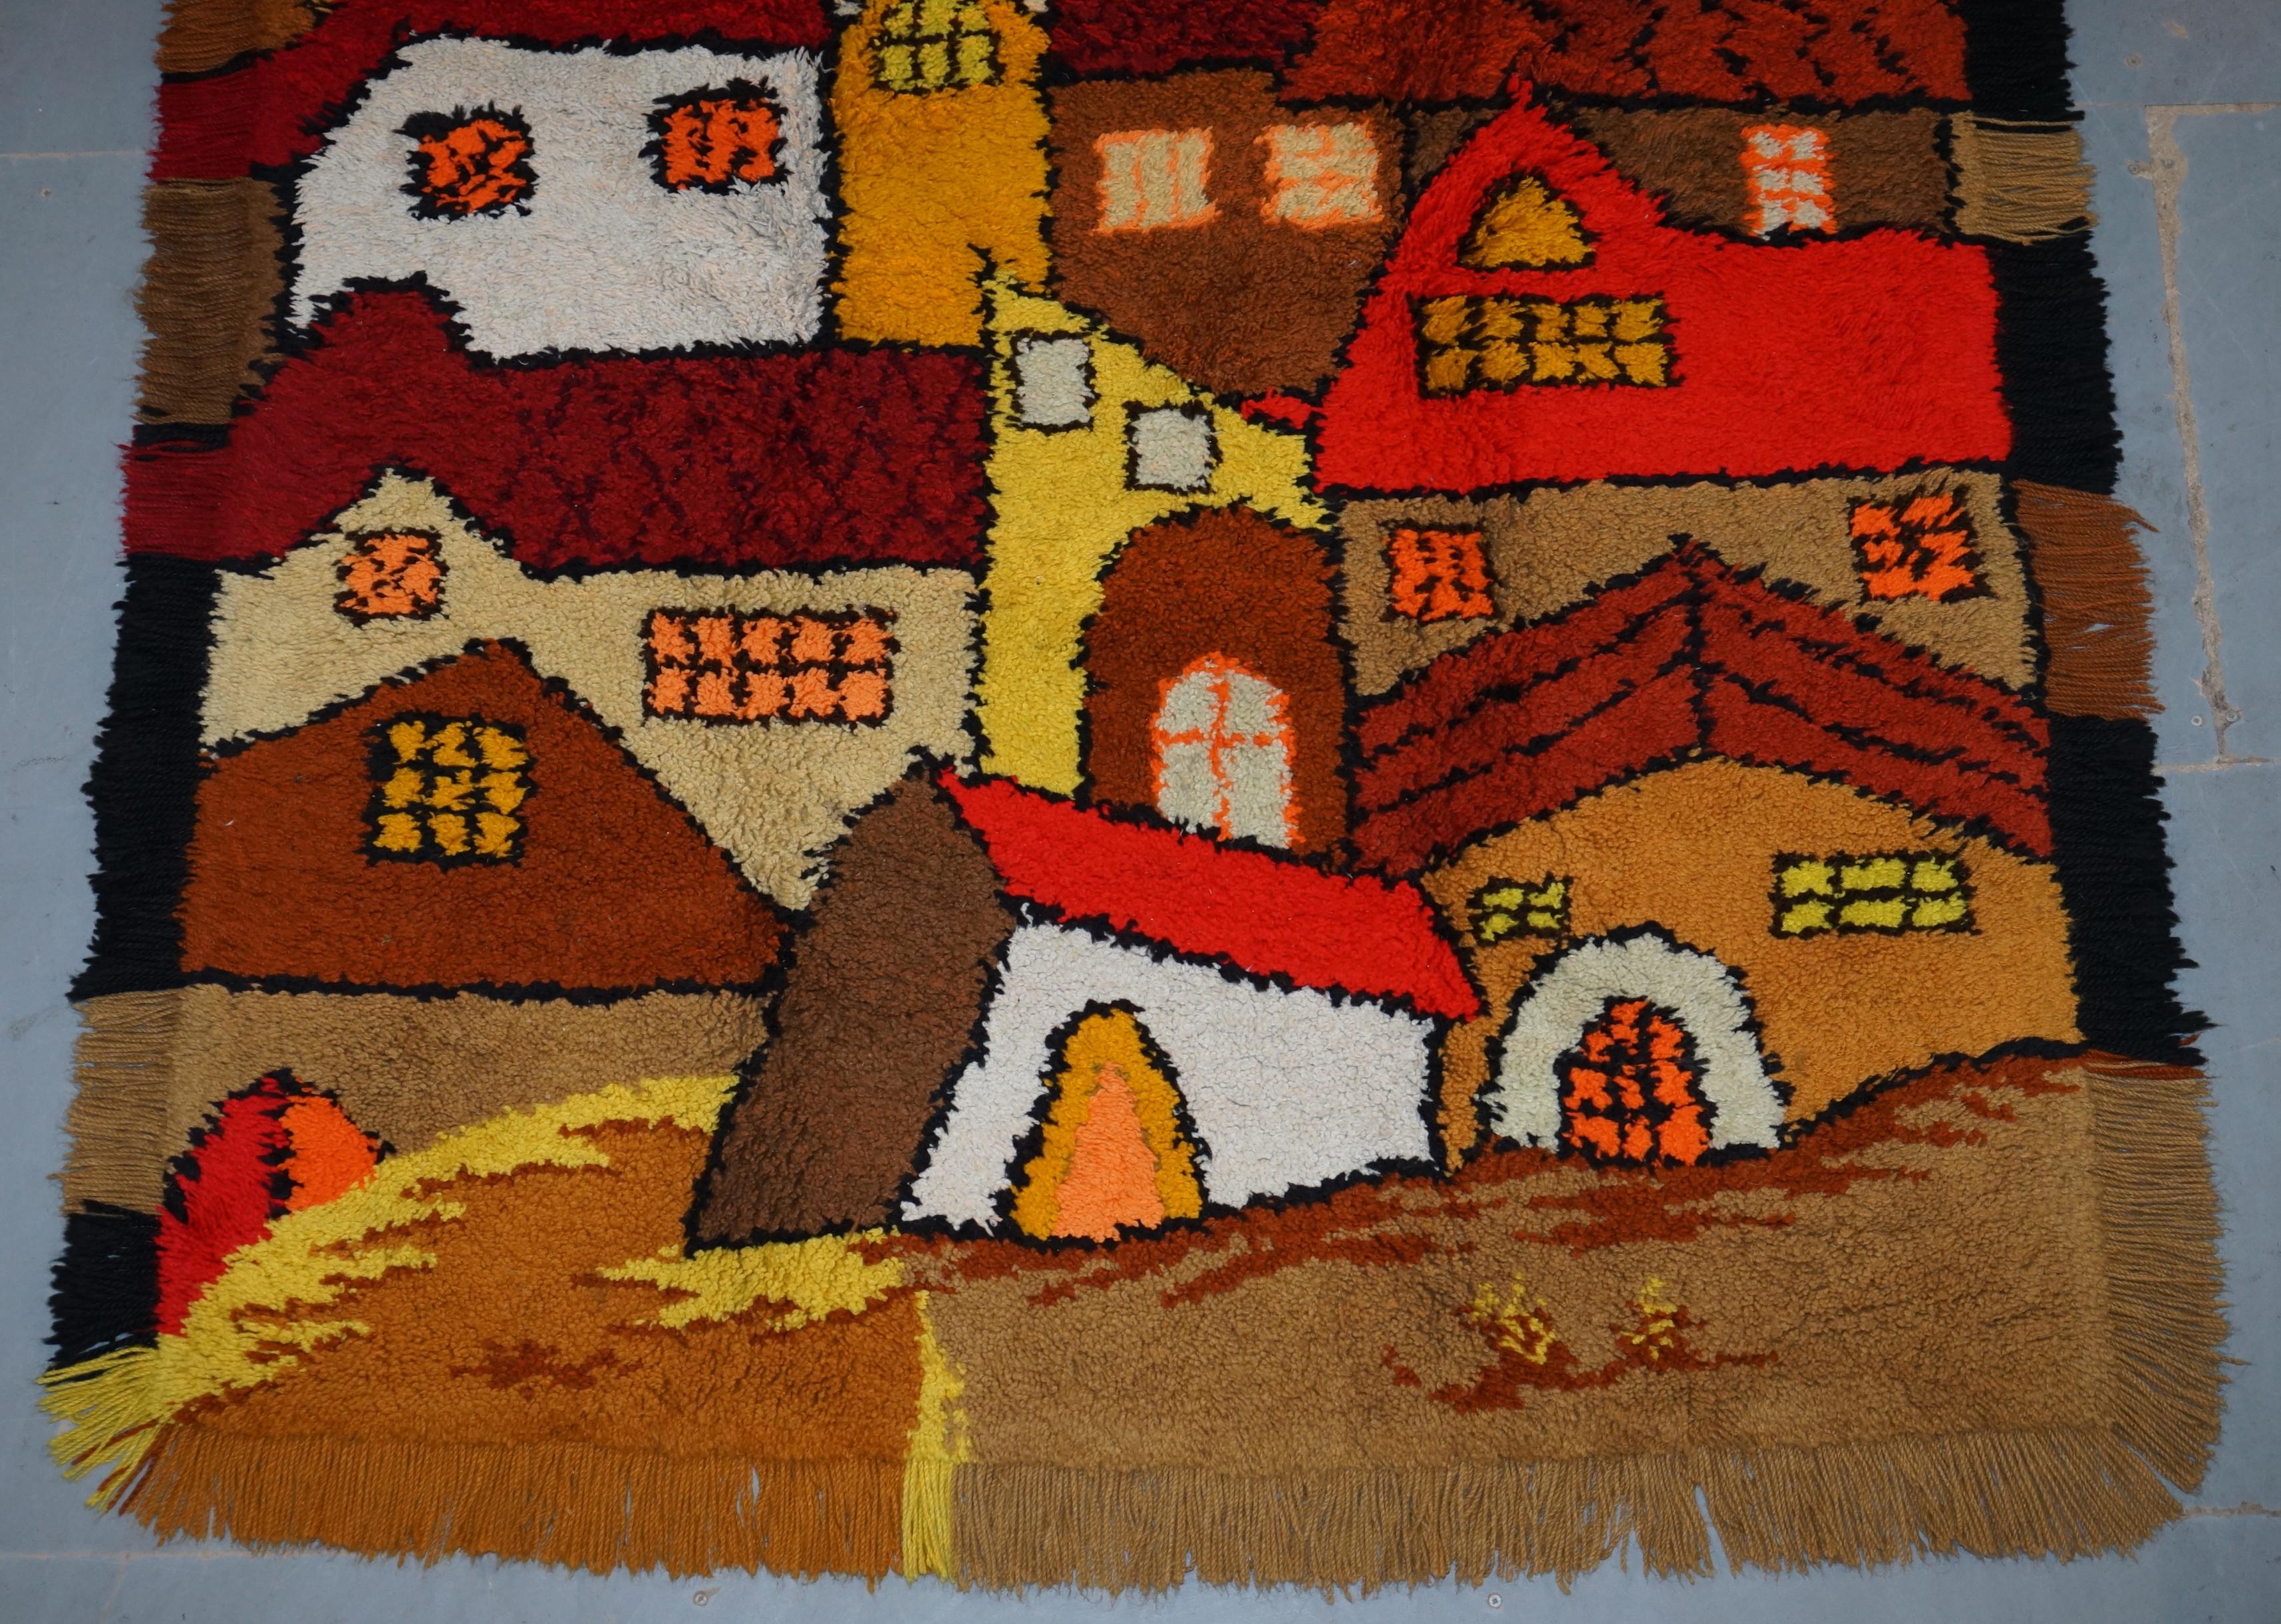 English Stunning Large Shag Pile Rug Depicting Houses in the Style of L.S Lowry For Sale